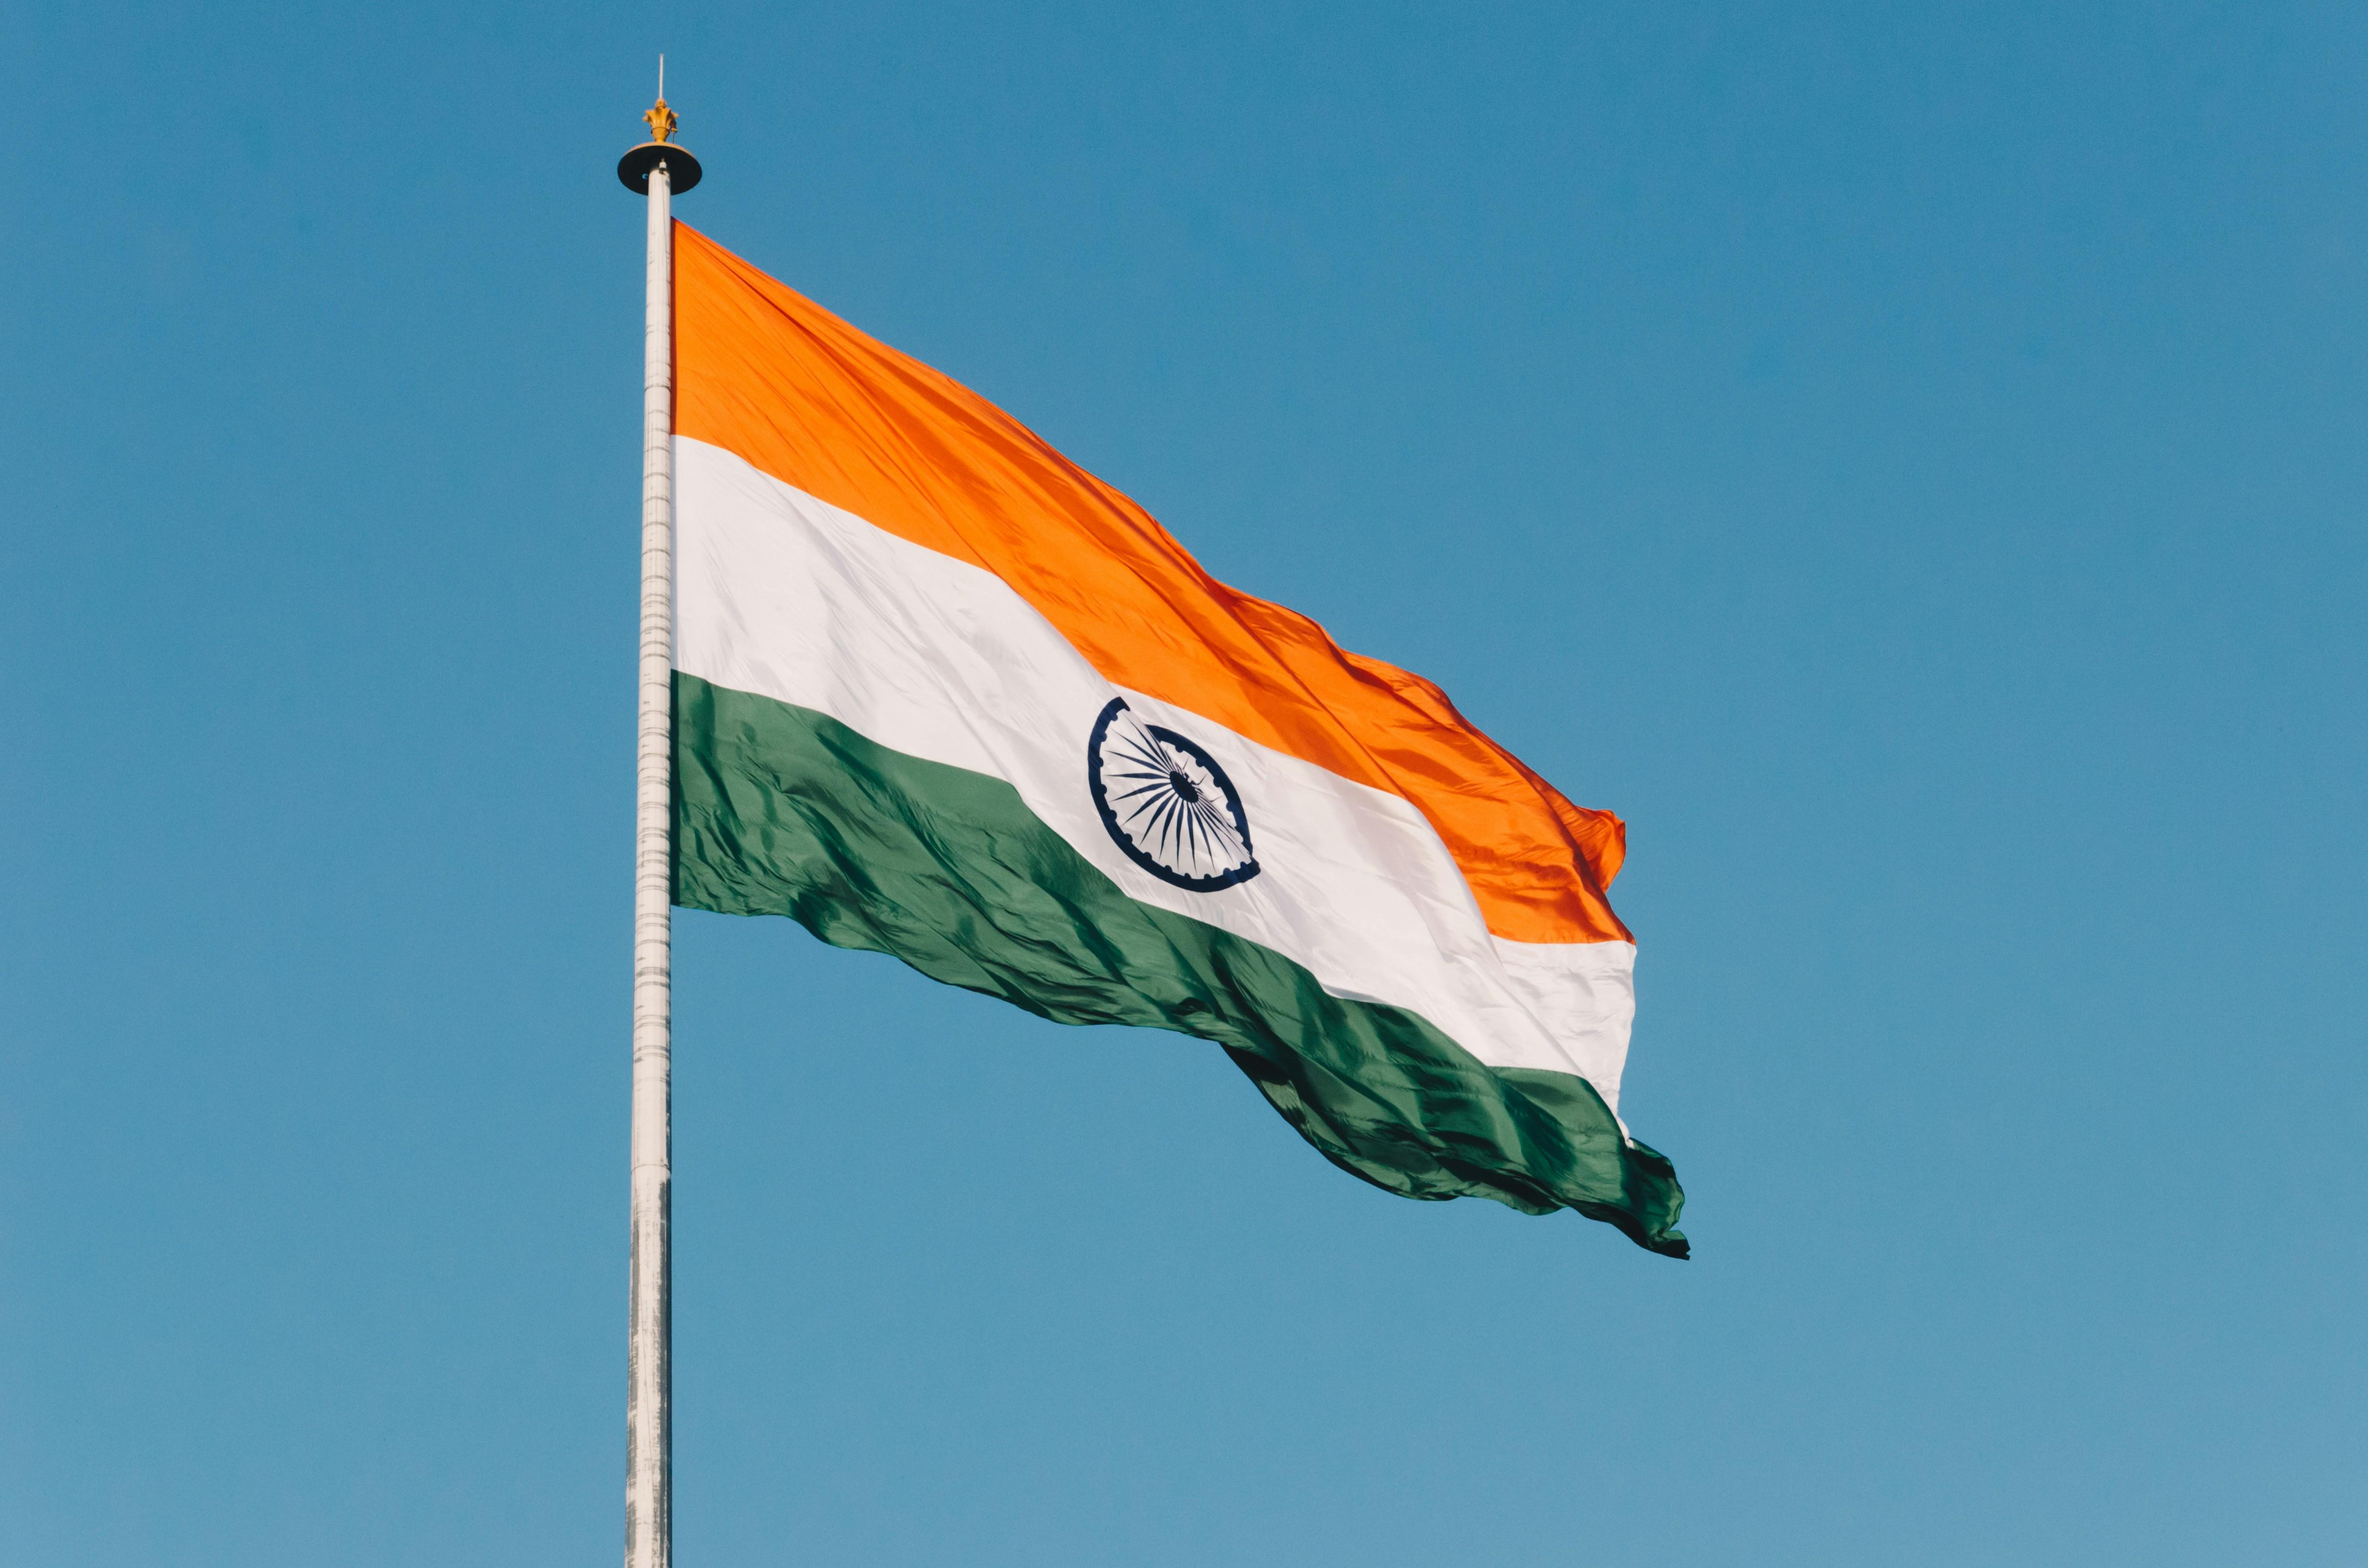 Image shows the Indian flag, comprised of 3 colored stripes of orange, white and green from top to bottom with an emblem at the center of the middle white stripe, flying high with the sky as the background.